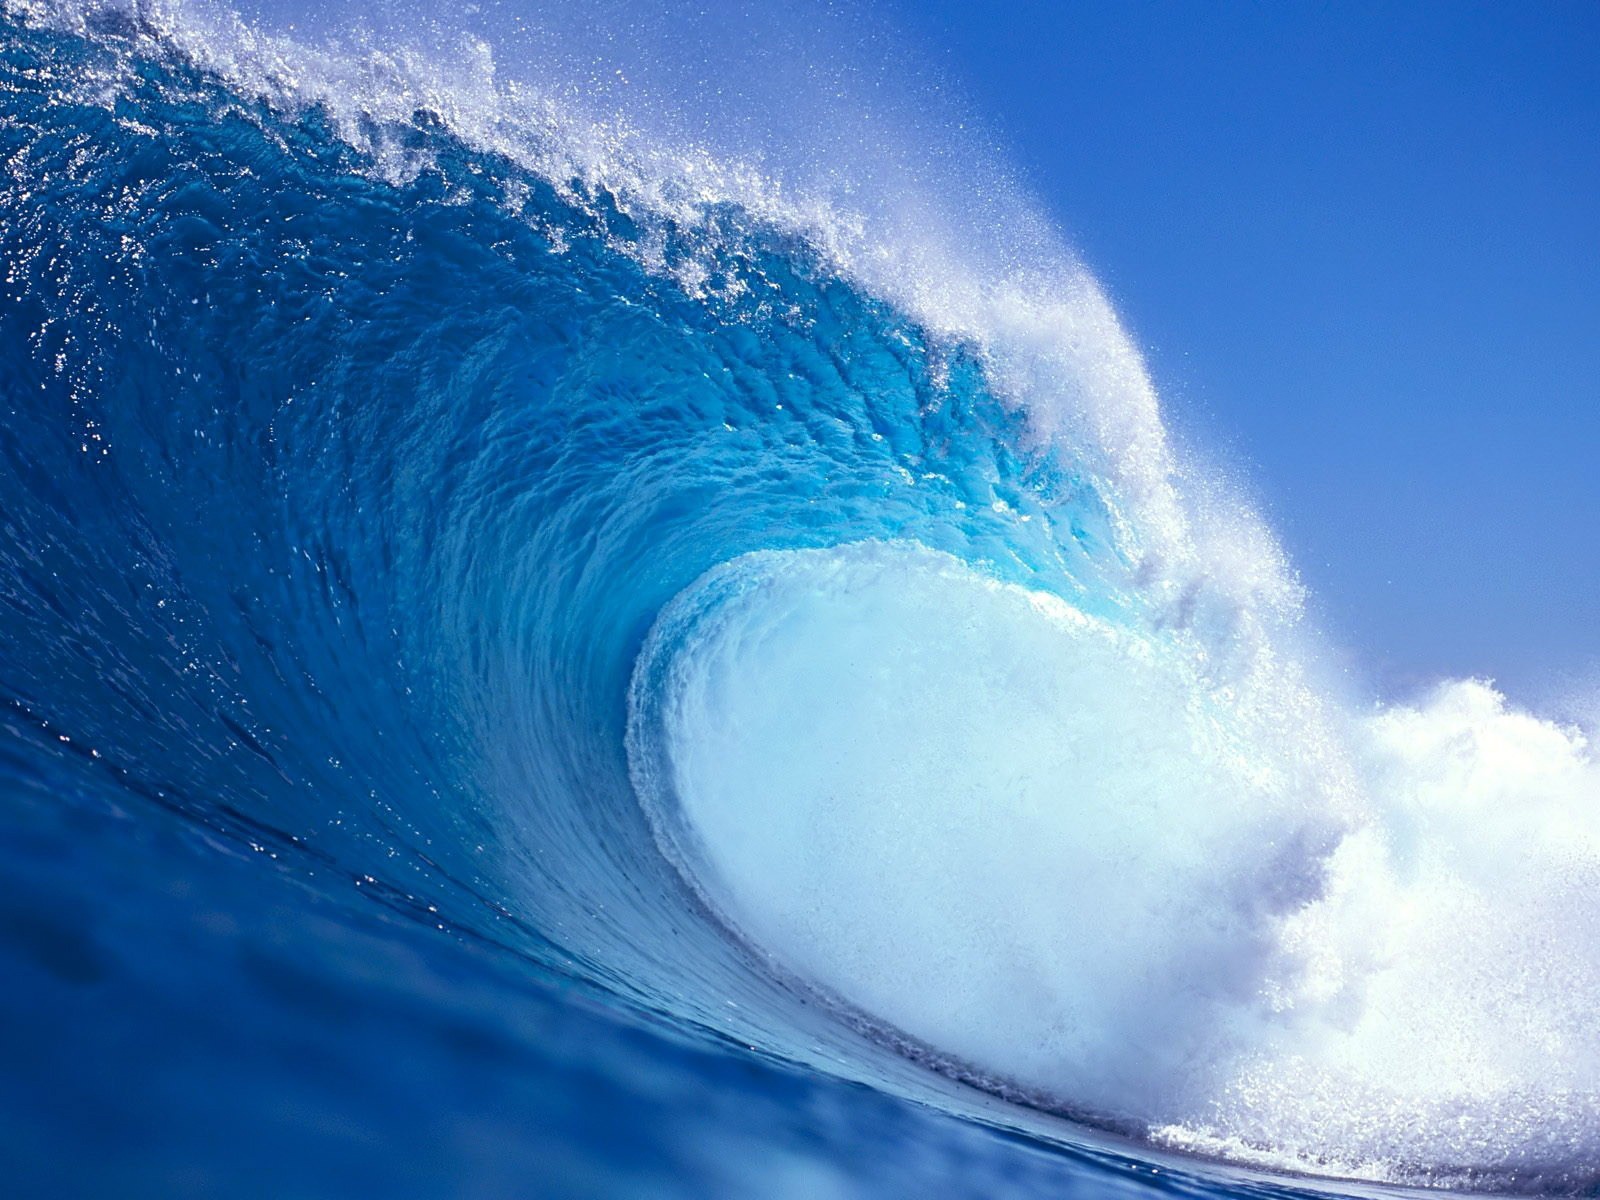 widescreen surfing waves image